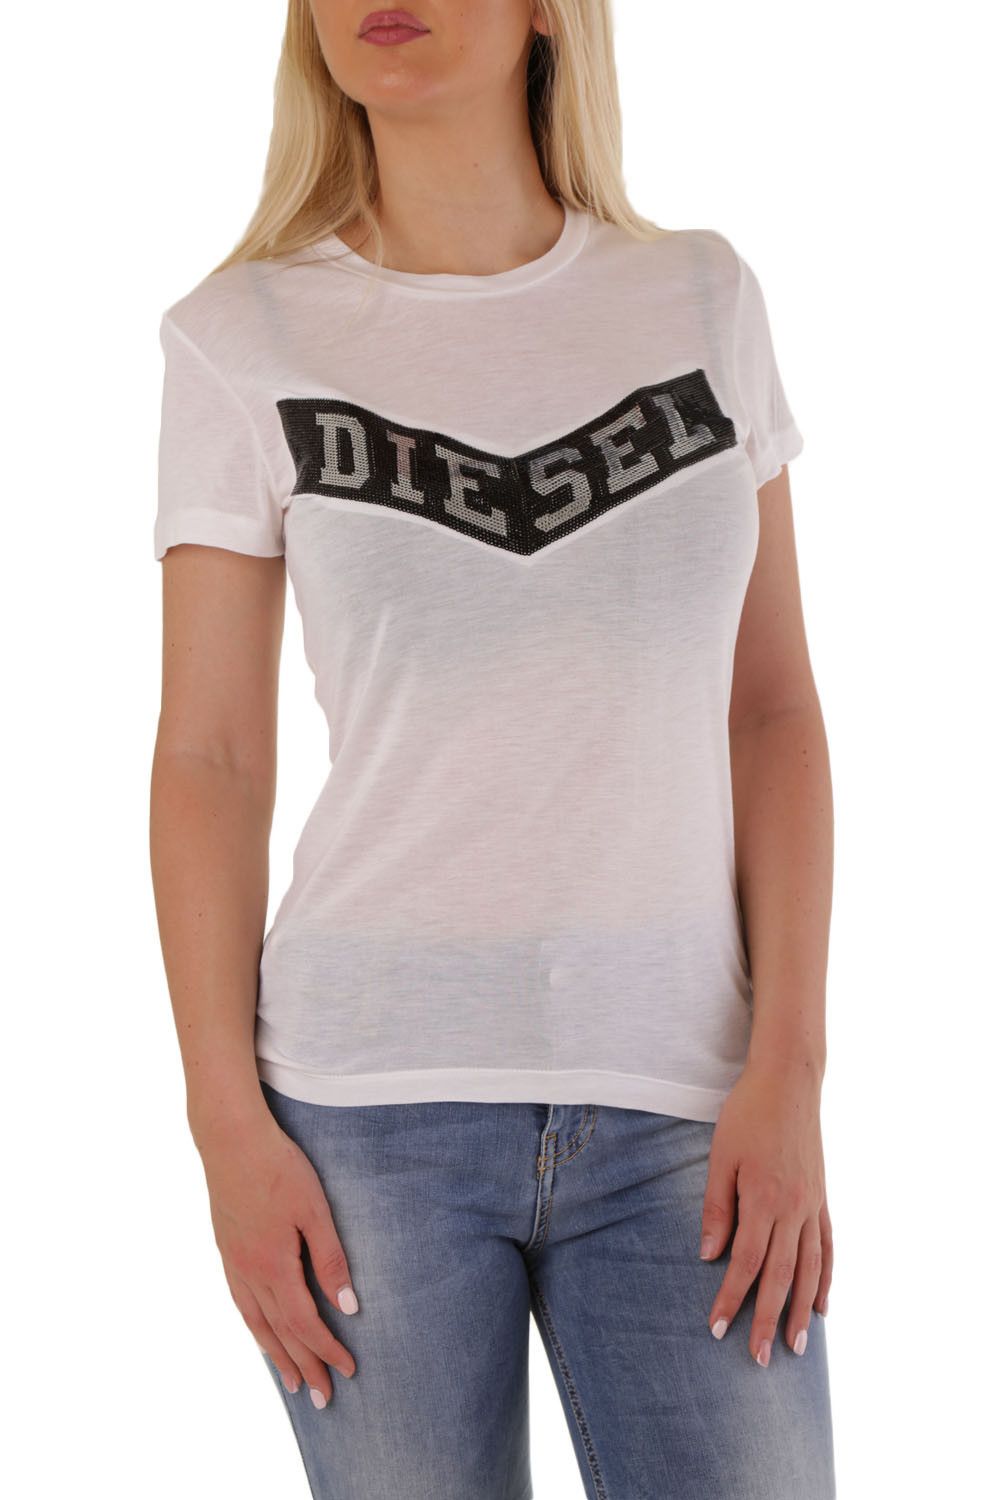 Brand: Diesel
Gender: Women
Type: T-shirts
Season: Spring/Summer

PRODUCT DETAIL
• Color: white
• Pattern: print
• Fastening: slip on
• Sleeves: short
• Neckline: round neck

COMPOSITION AND MATERIAL
• Composition: -100% viscose 
•  Washing: machine wash at 30°